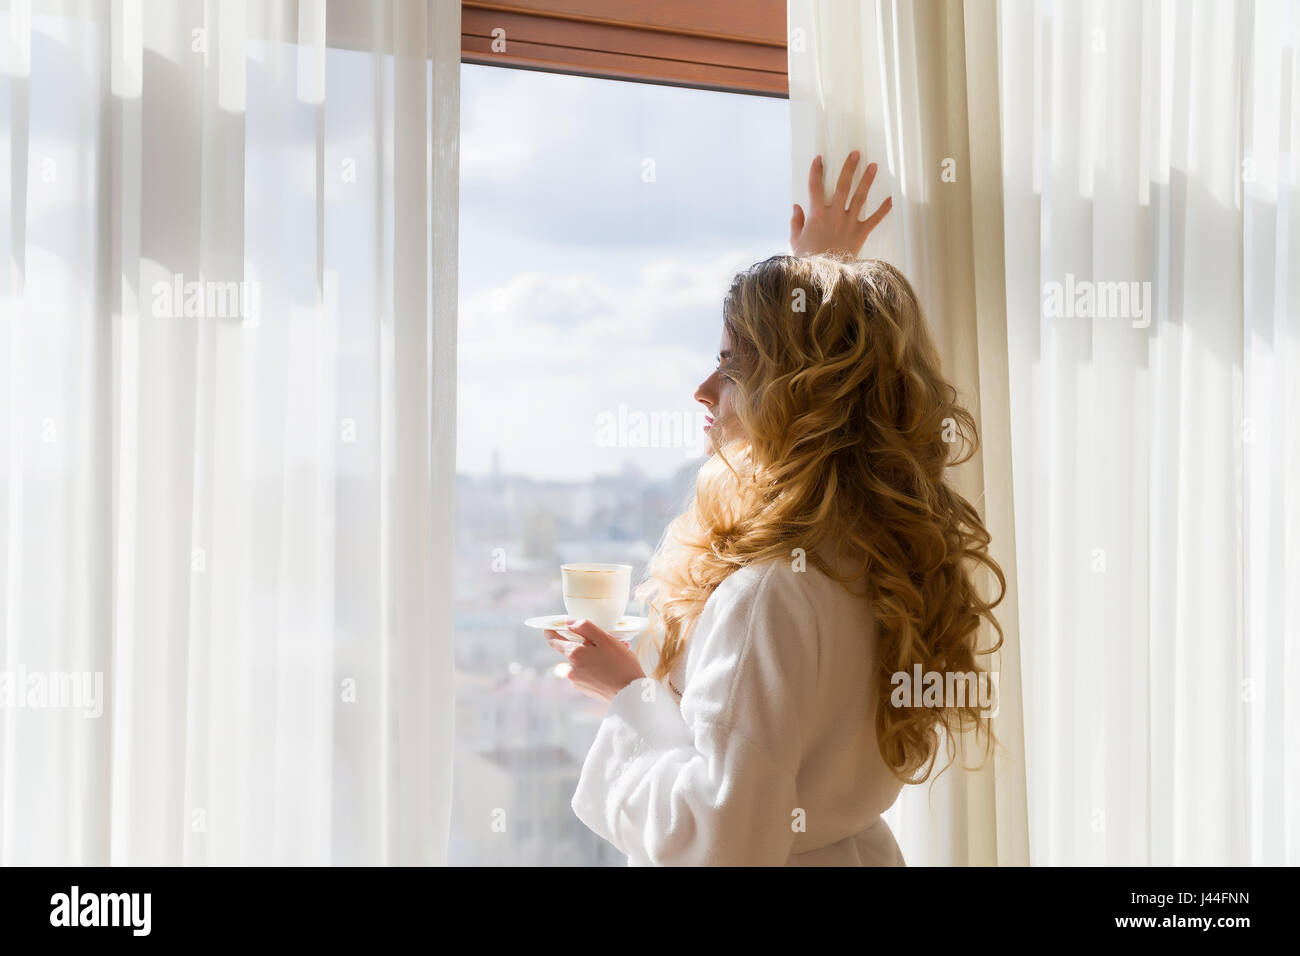 Beautiful woman in sheer nightgown looking out of a window with  backlighting Stock Photo - Alamy